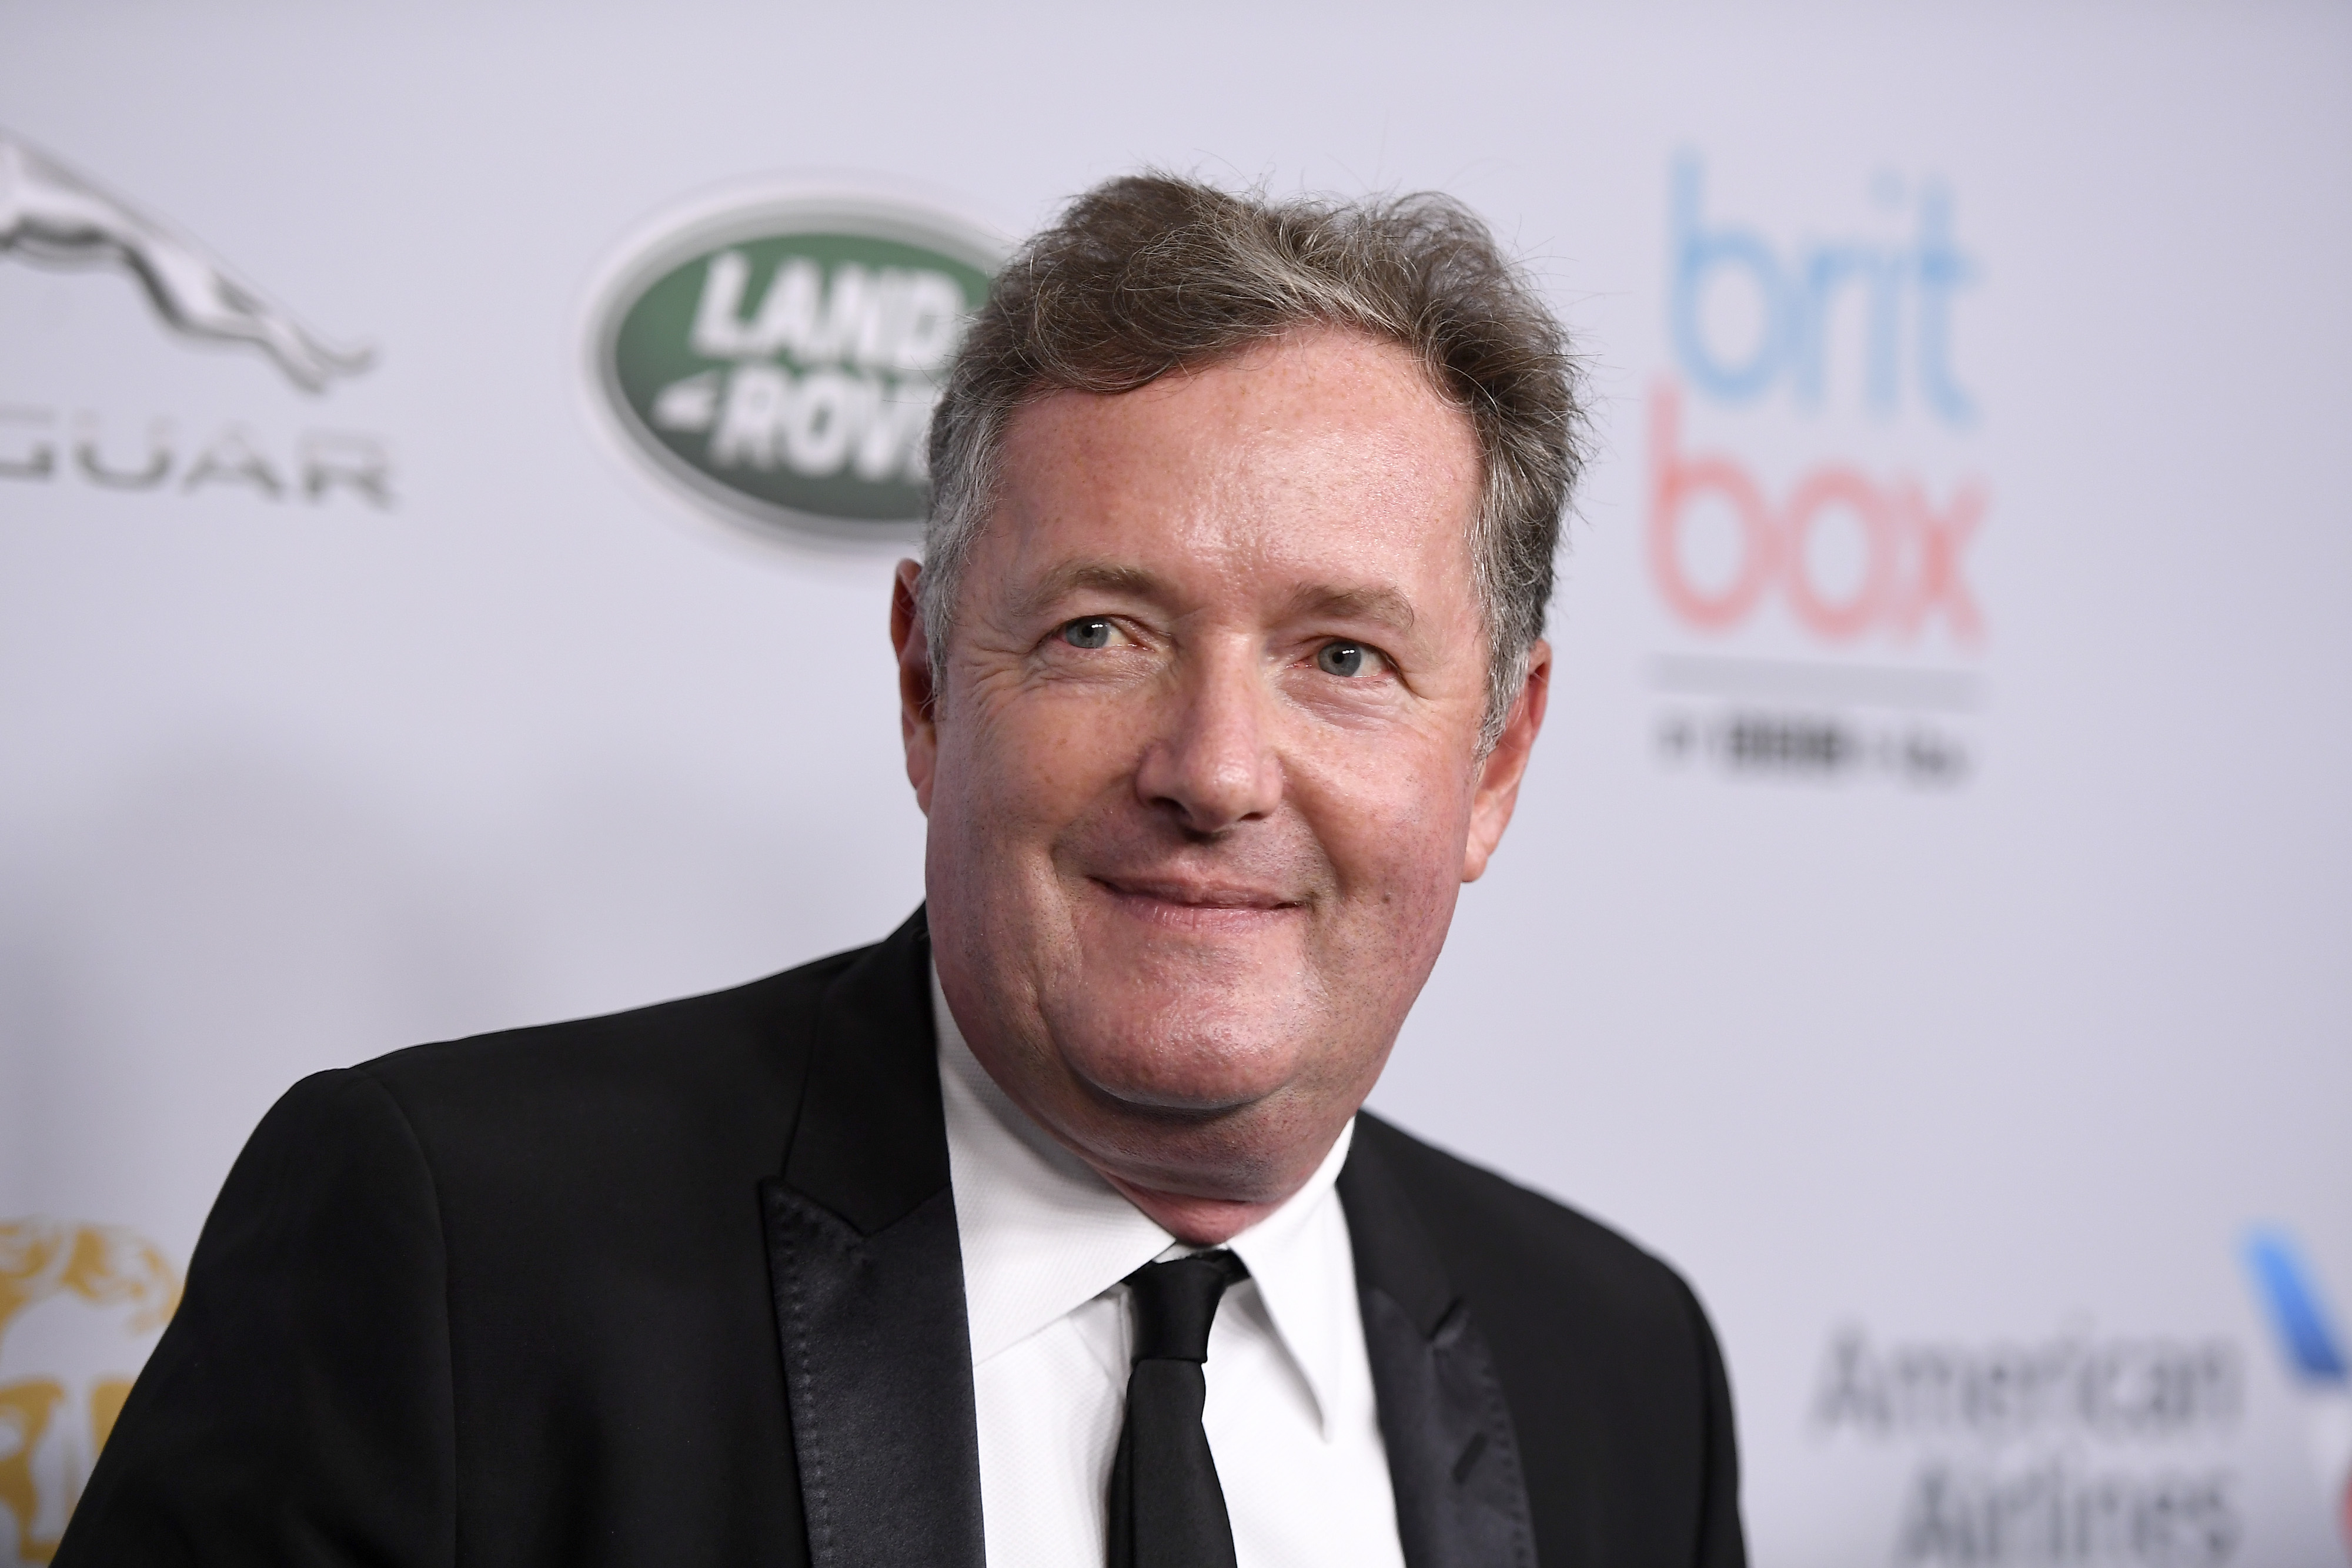 Piers career from Britain’s Got Talent to Good Morning Britain